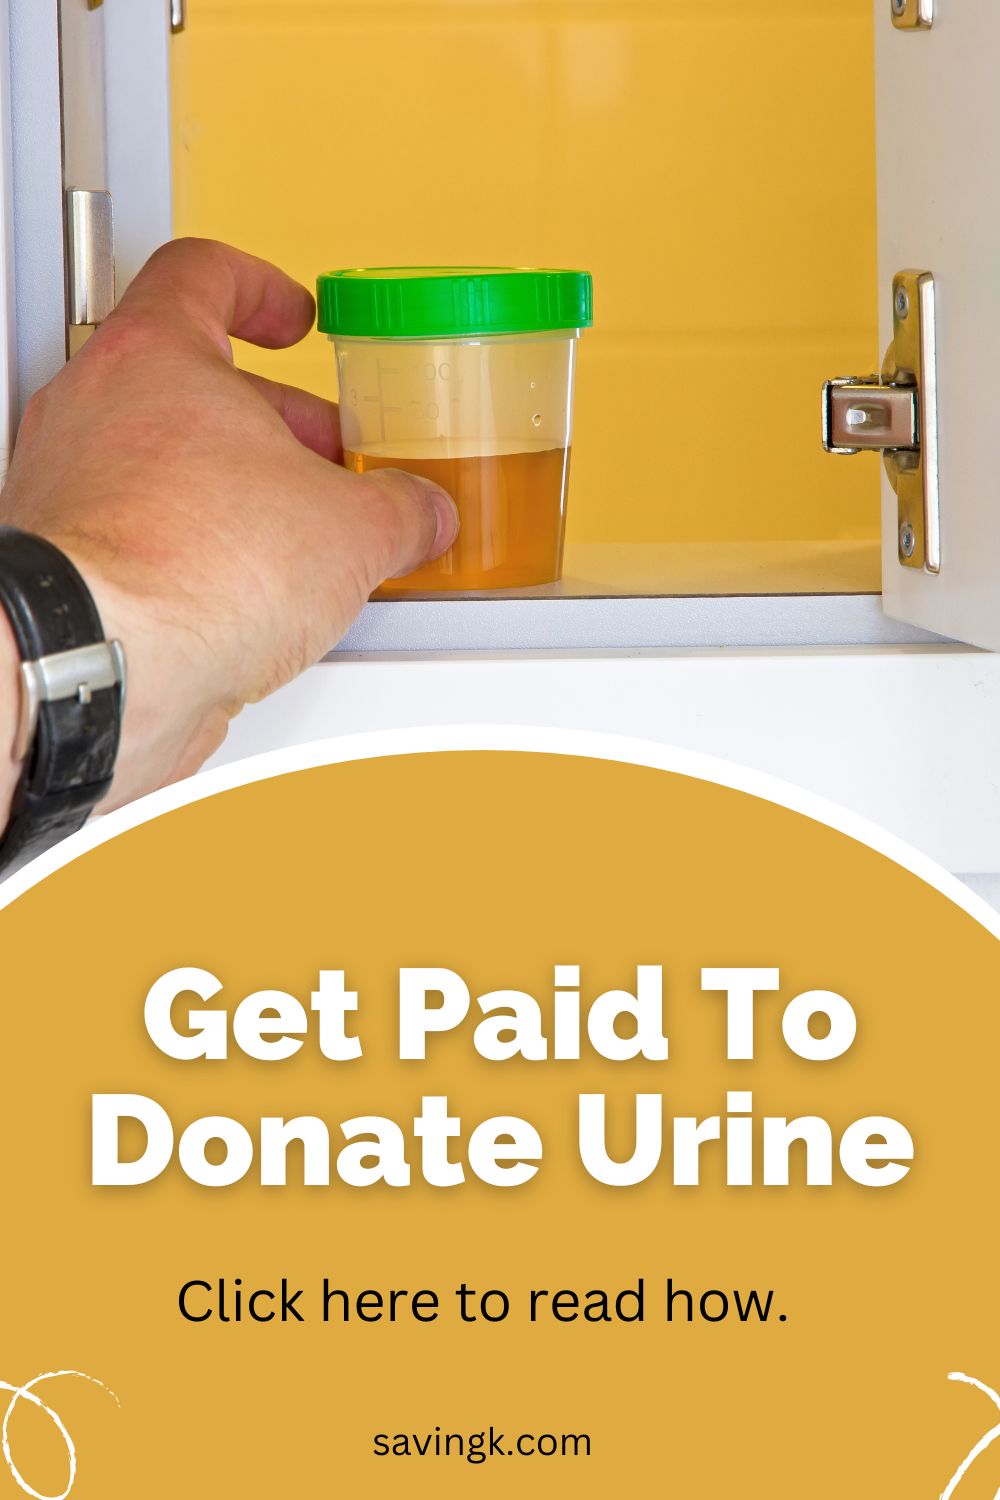 Get Paid To Donate Urine